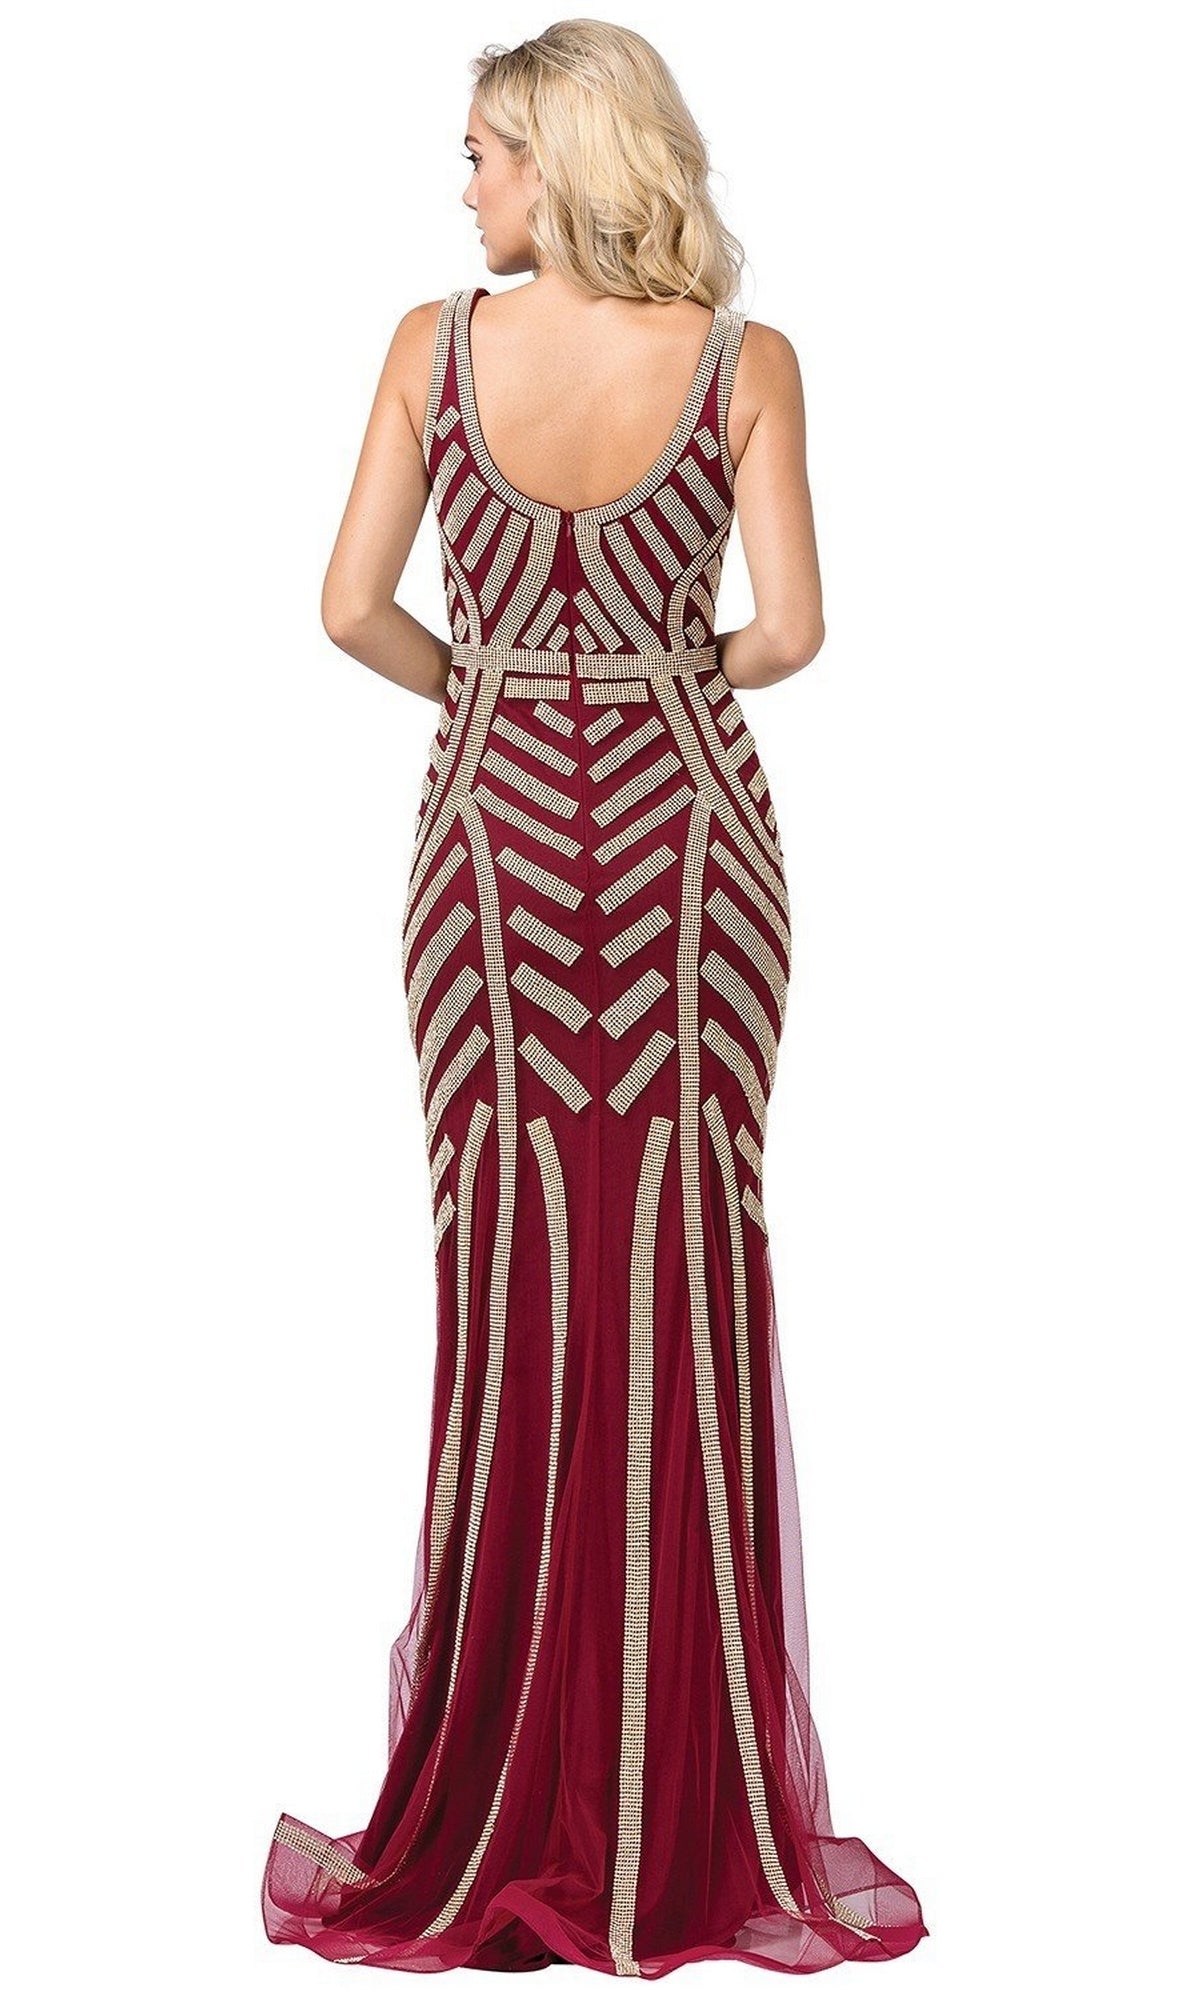 Burgundy/Gold Long Formal Dress with Beaded Stripes